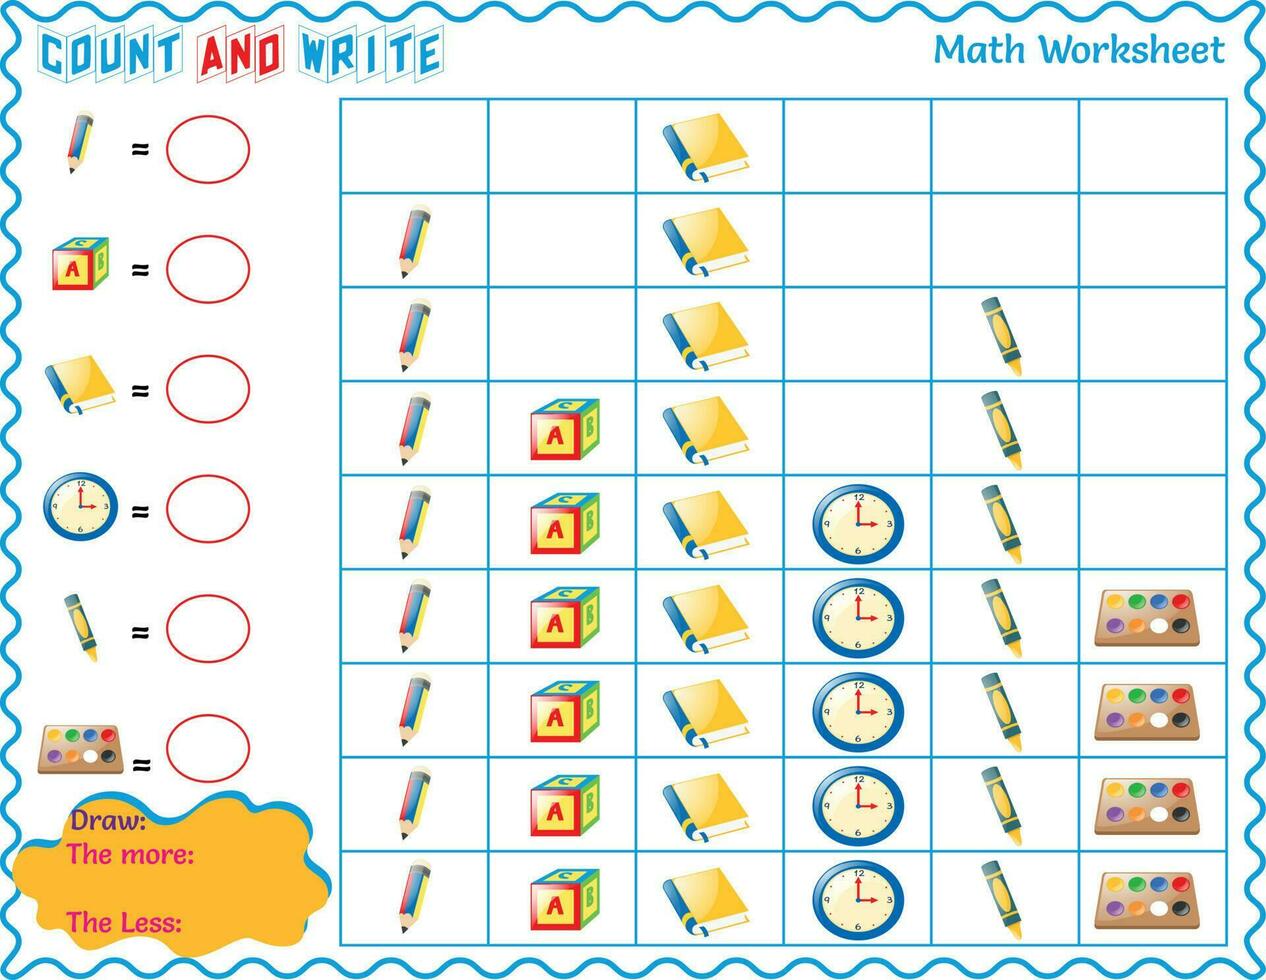 Mathematical Worksheet Count and Write for Kids, numbers 1 to 9, learning math for children vector